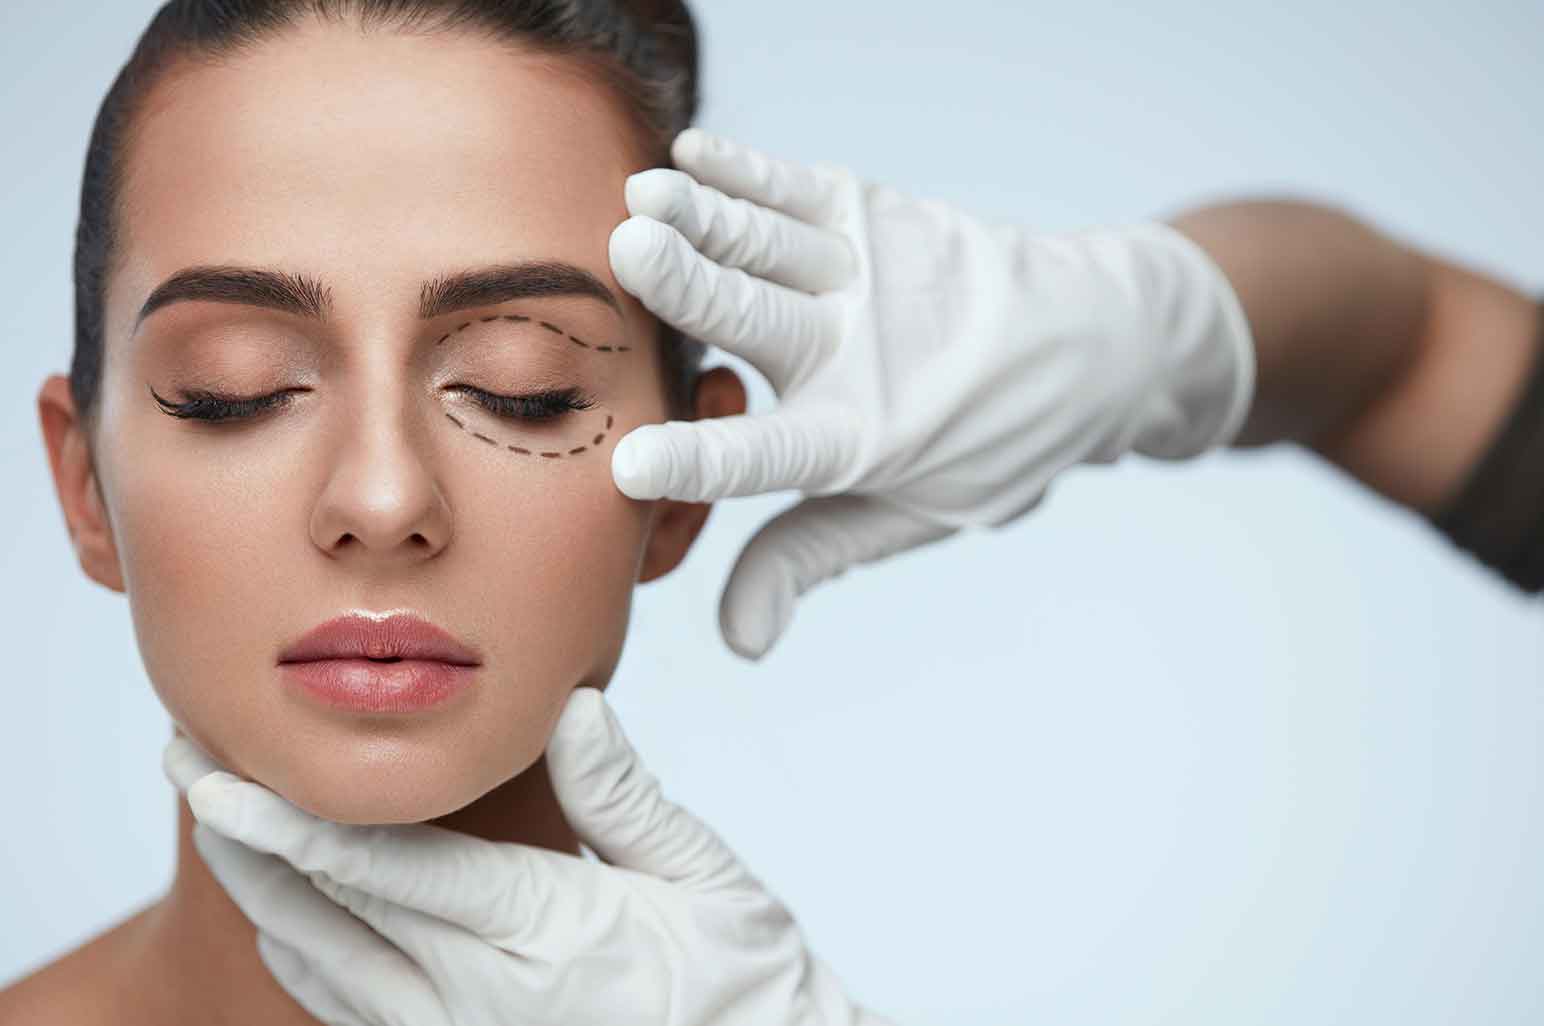 What to know about facial plastic surgery